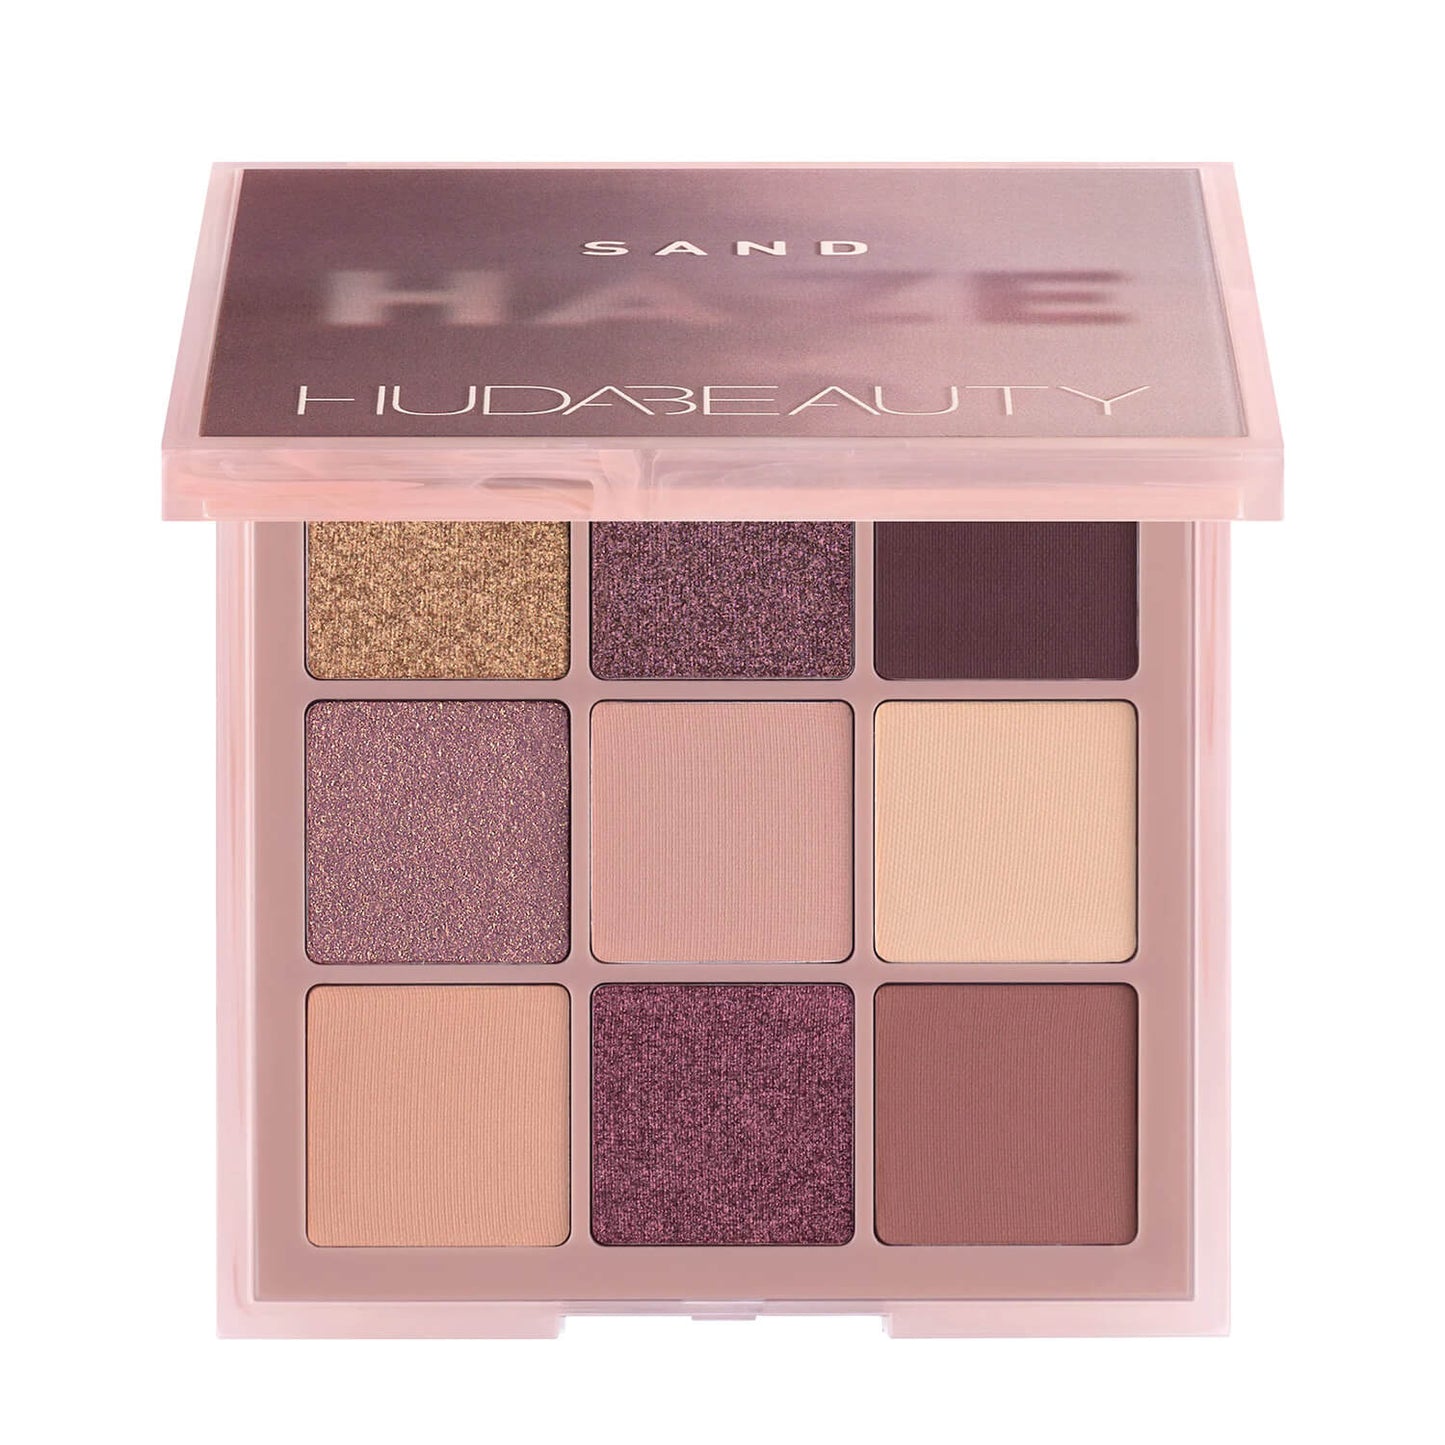 buy huda beauty sand obsessions palette available  at heygirl.pk for delivery in Pakistan